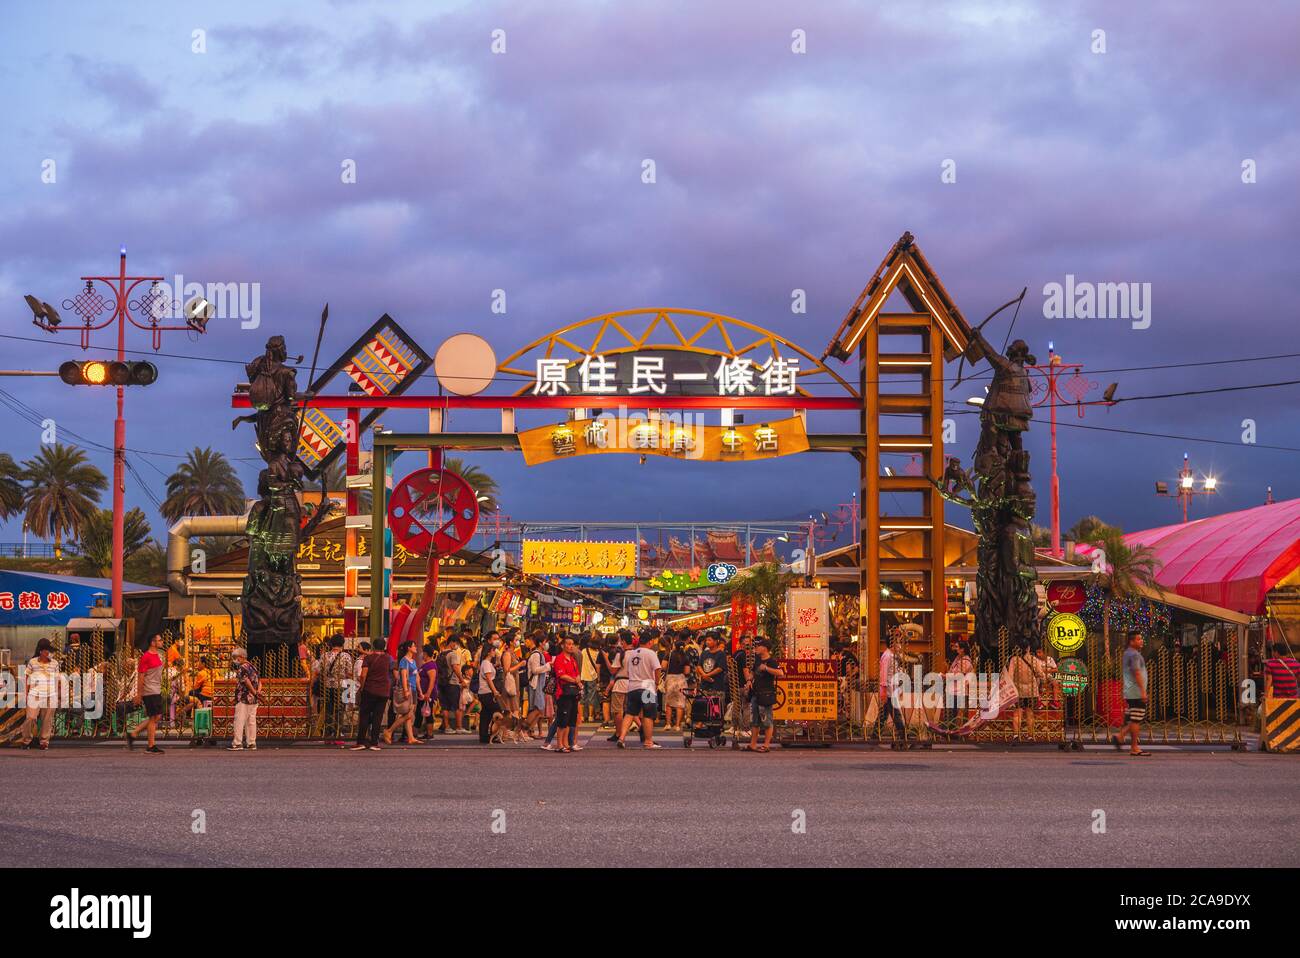 August 2, 2020: Aboriginal Street of Dongdamen Night Market, opened in July 2015 and located in Hualien City, Taiwan. It is the largest night market i Stock Photo